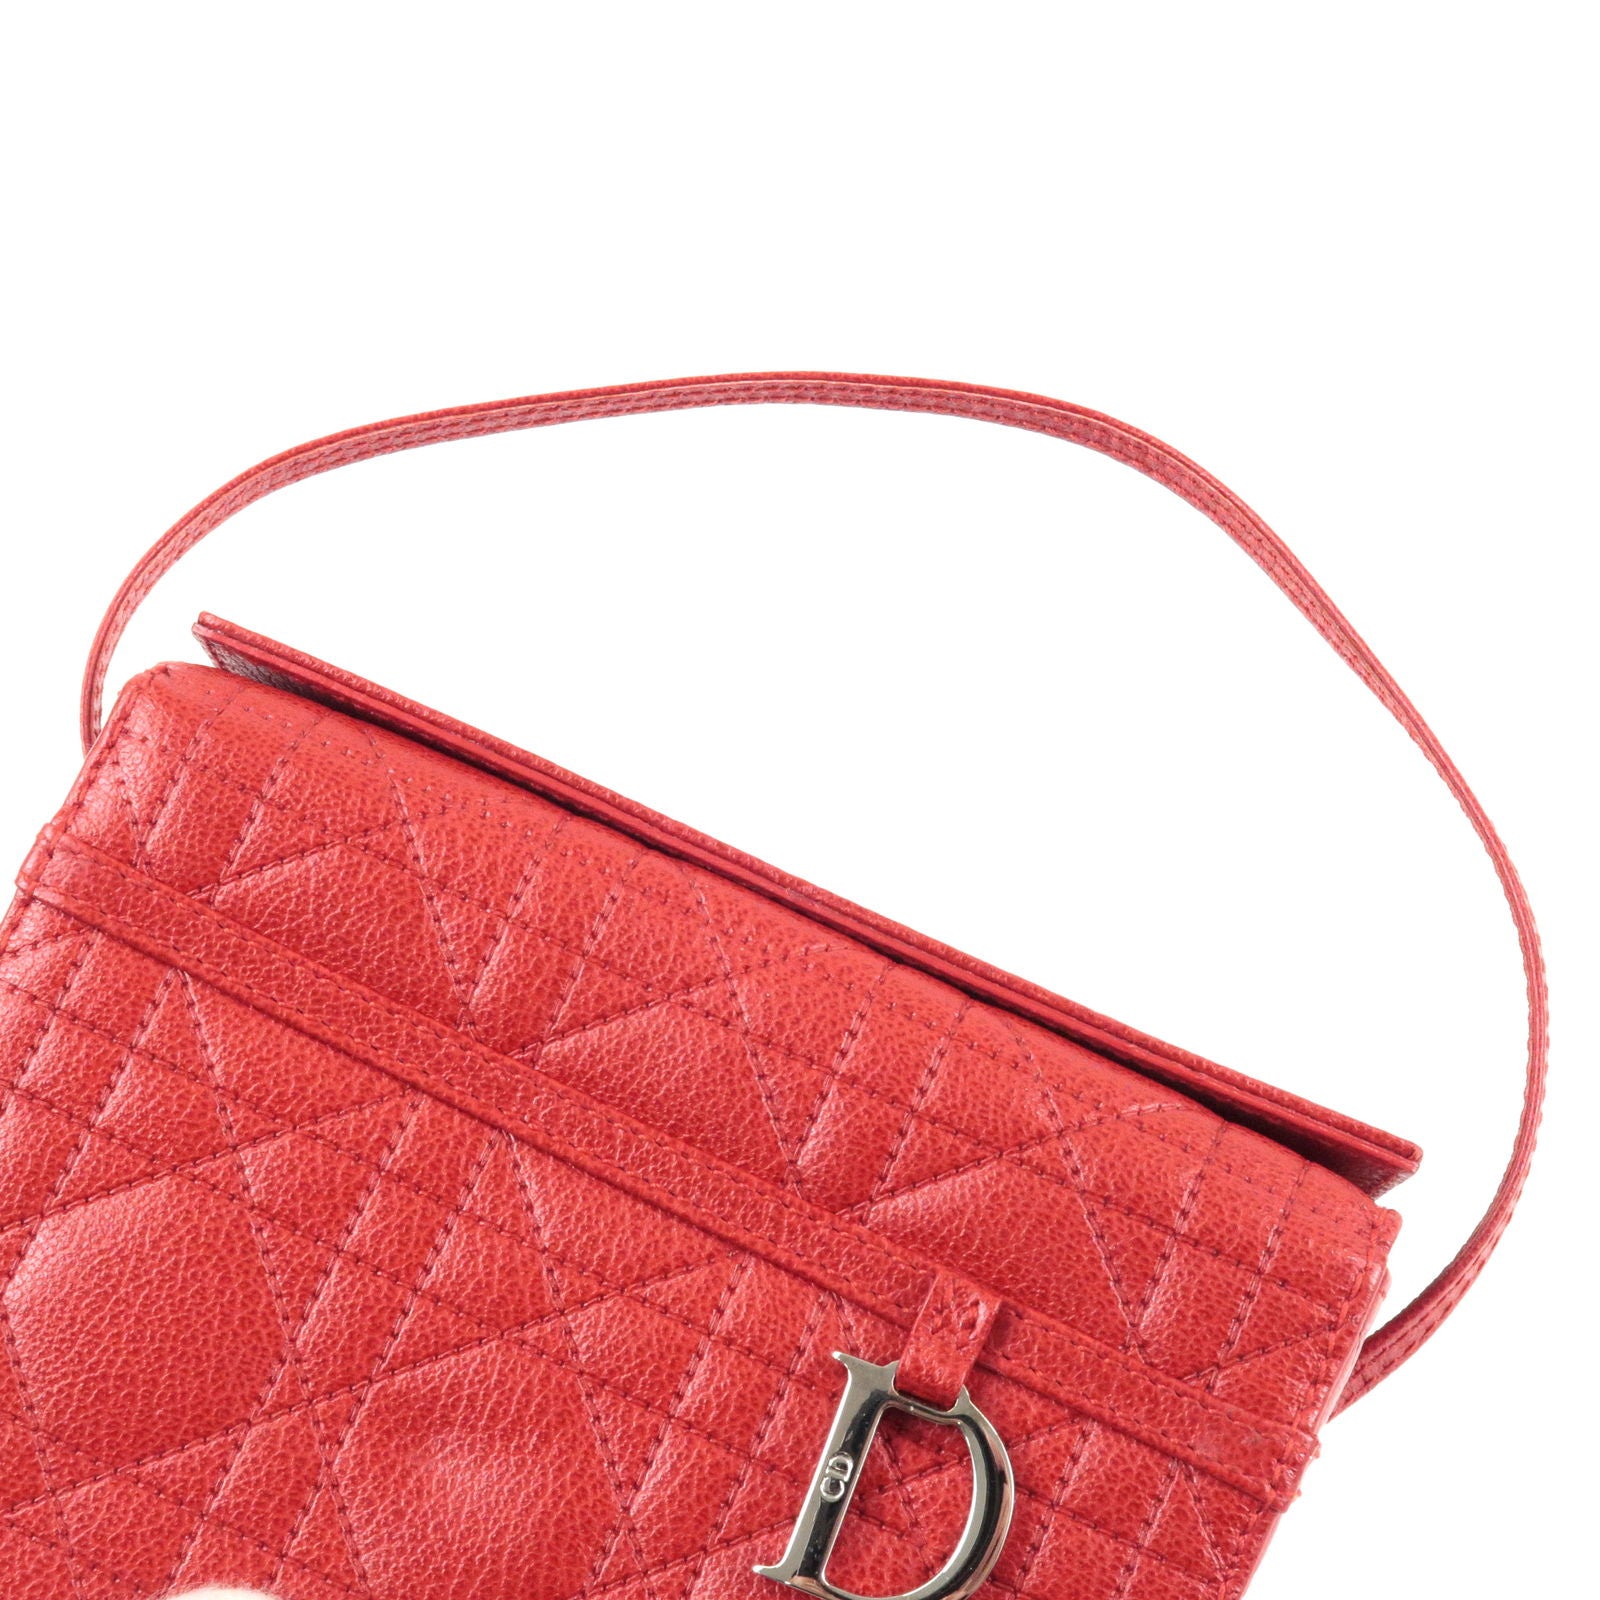 Christian-Dior-Cannage-Leather-Vanity-Bag-Mini-Bag-Red – dct-ep_vintage  luxury Store